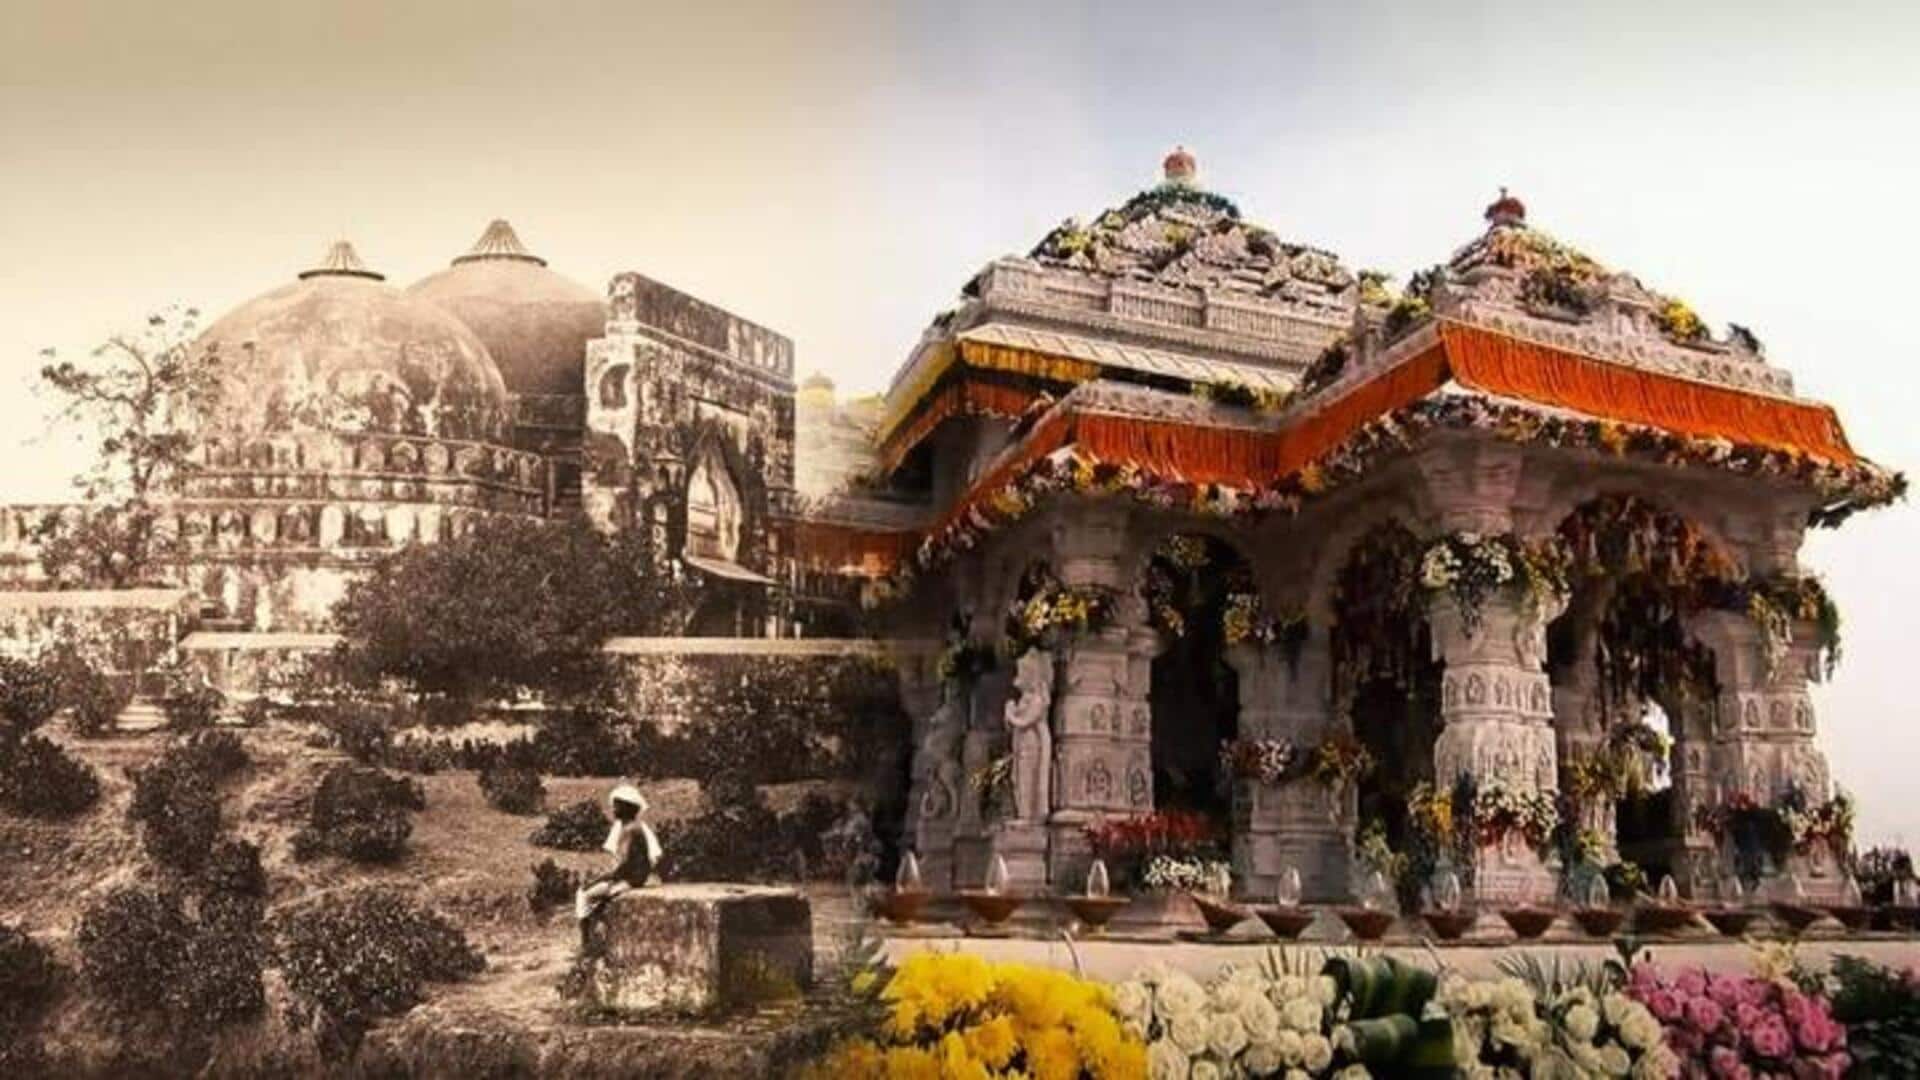 No iron used, Rs. 1,800cr spent: Facts about Ram Mandir